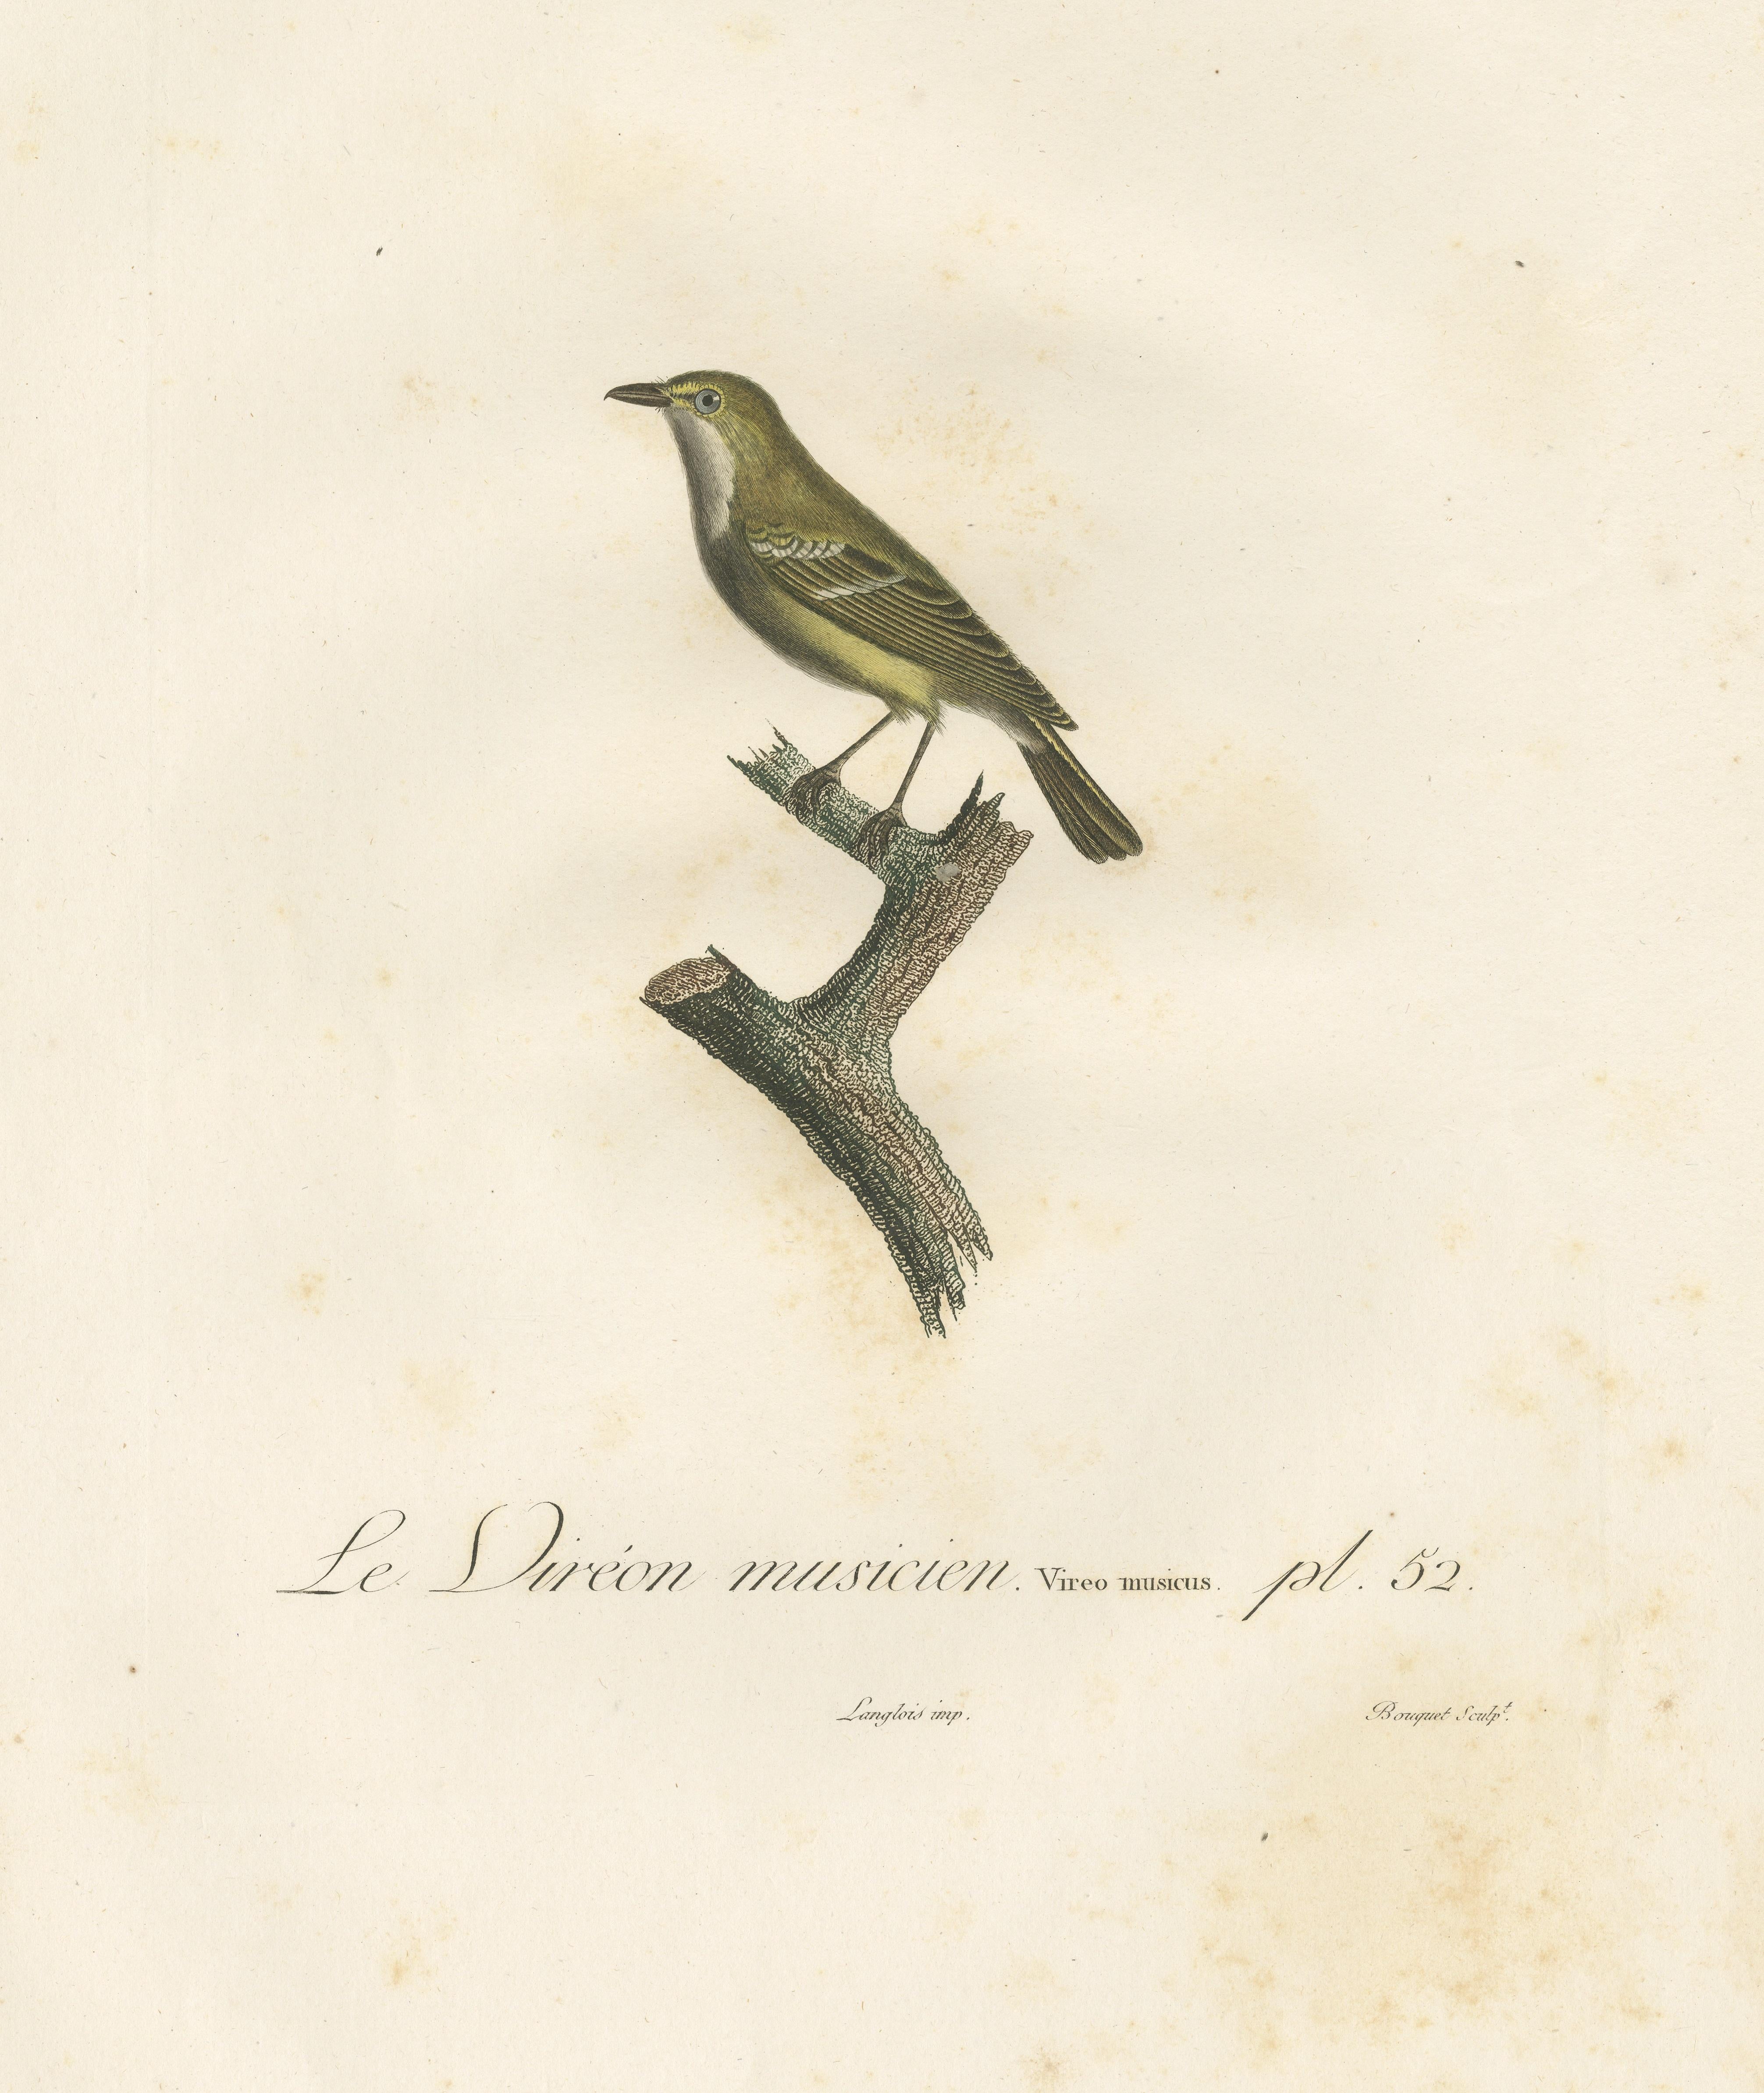 Large Antique Vireo Bird Illustration - 1807 Vieillot Handcolored Print In Good Condition For Sale In Langweer, NL